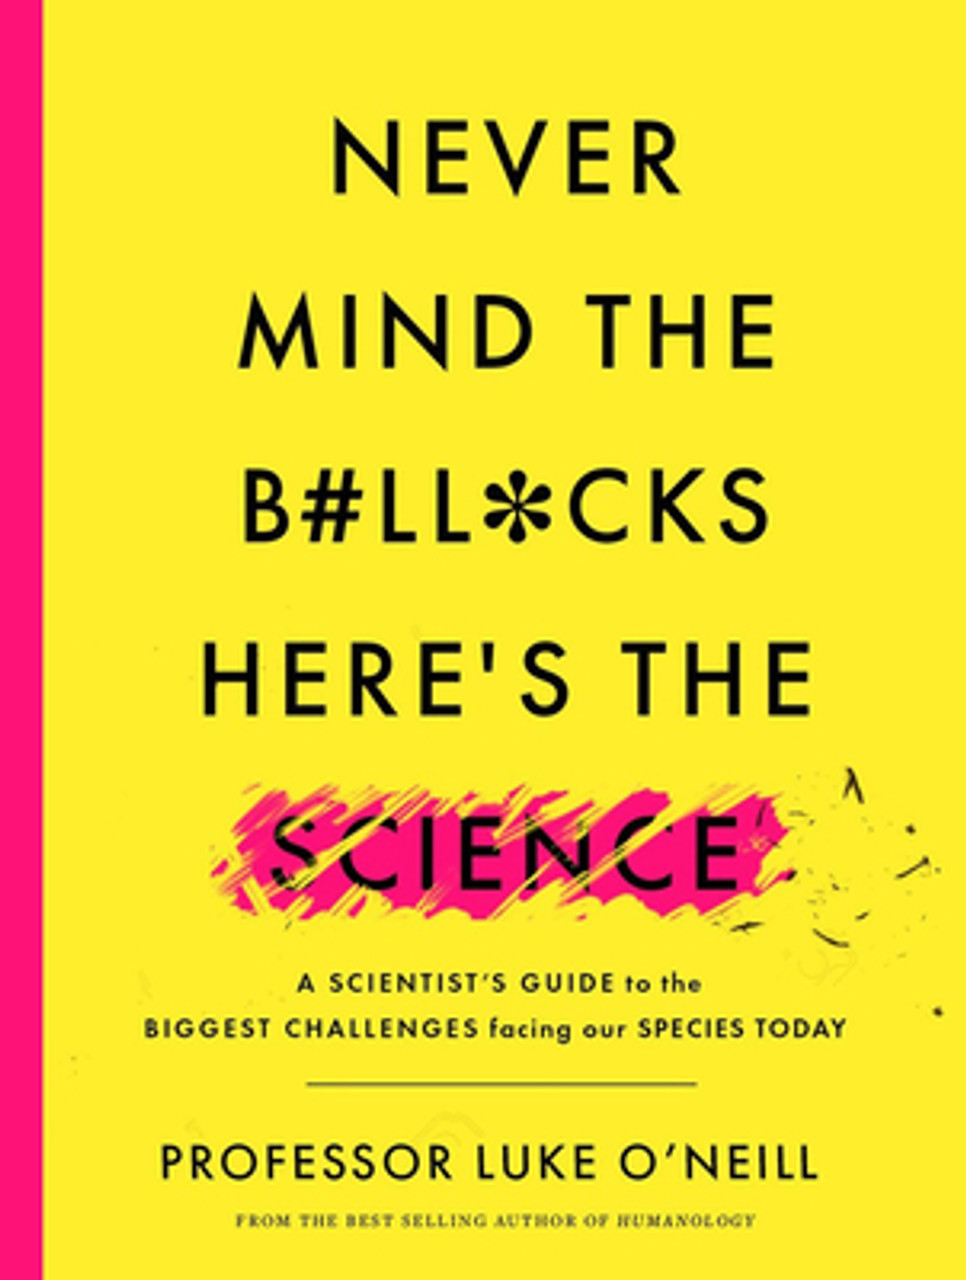 Professor Luke O'Neill / Never Mind the B#ll*cks, Here’s the Science: A Scientist’s Guide to the Biggest Challenges Facing our Species Today (Large Hardback)